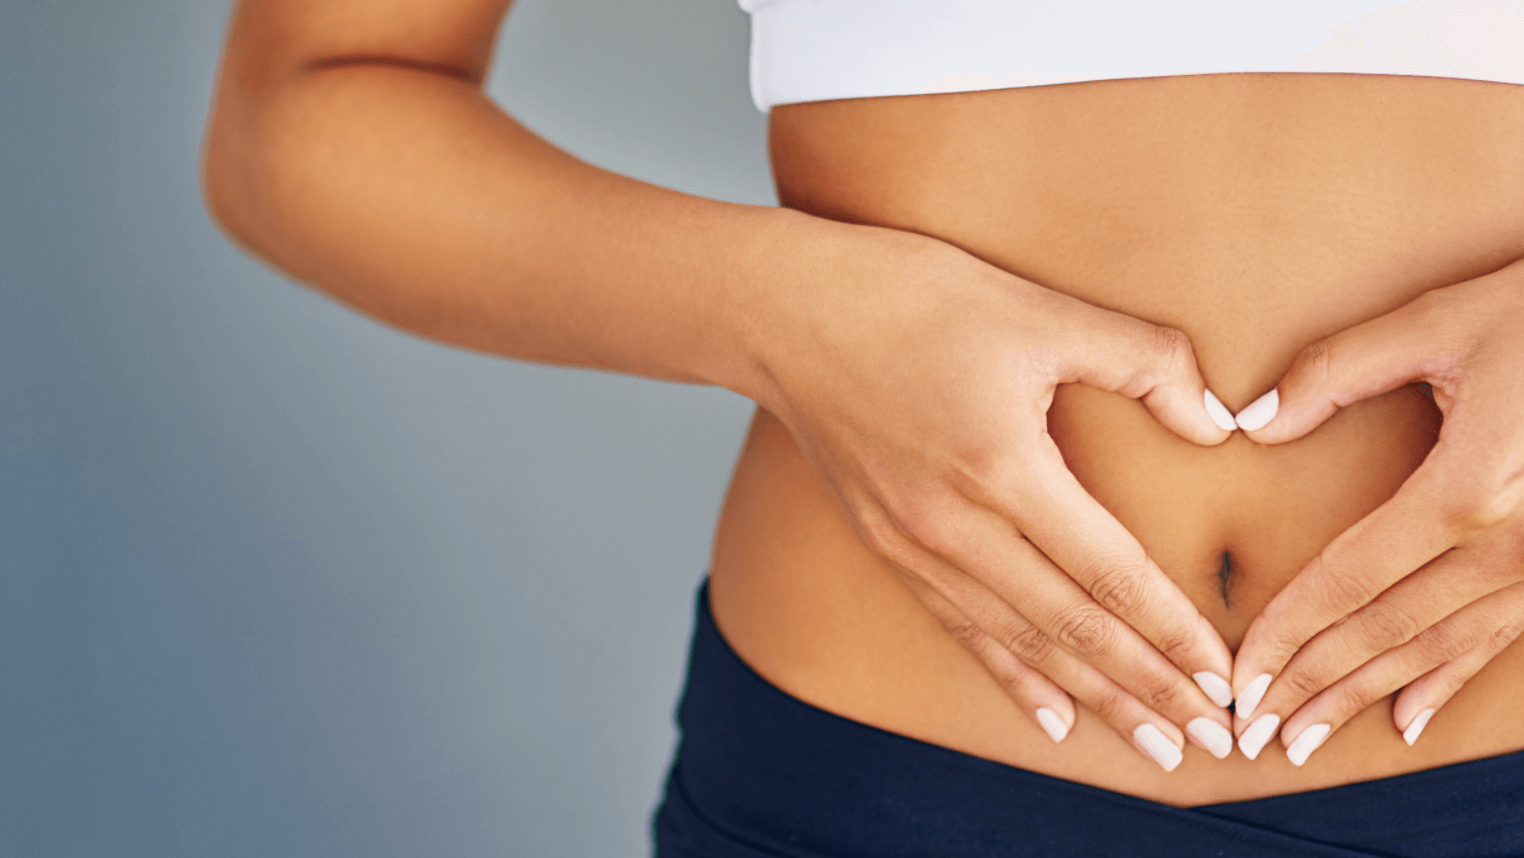 How long is healing after tummy tuck? - Power Plastic Surgery